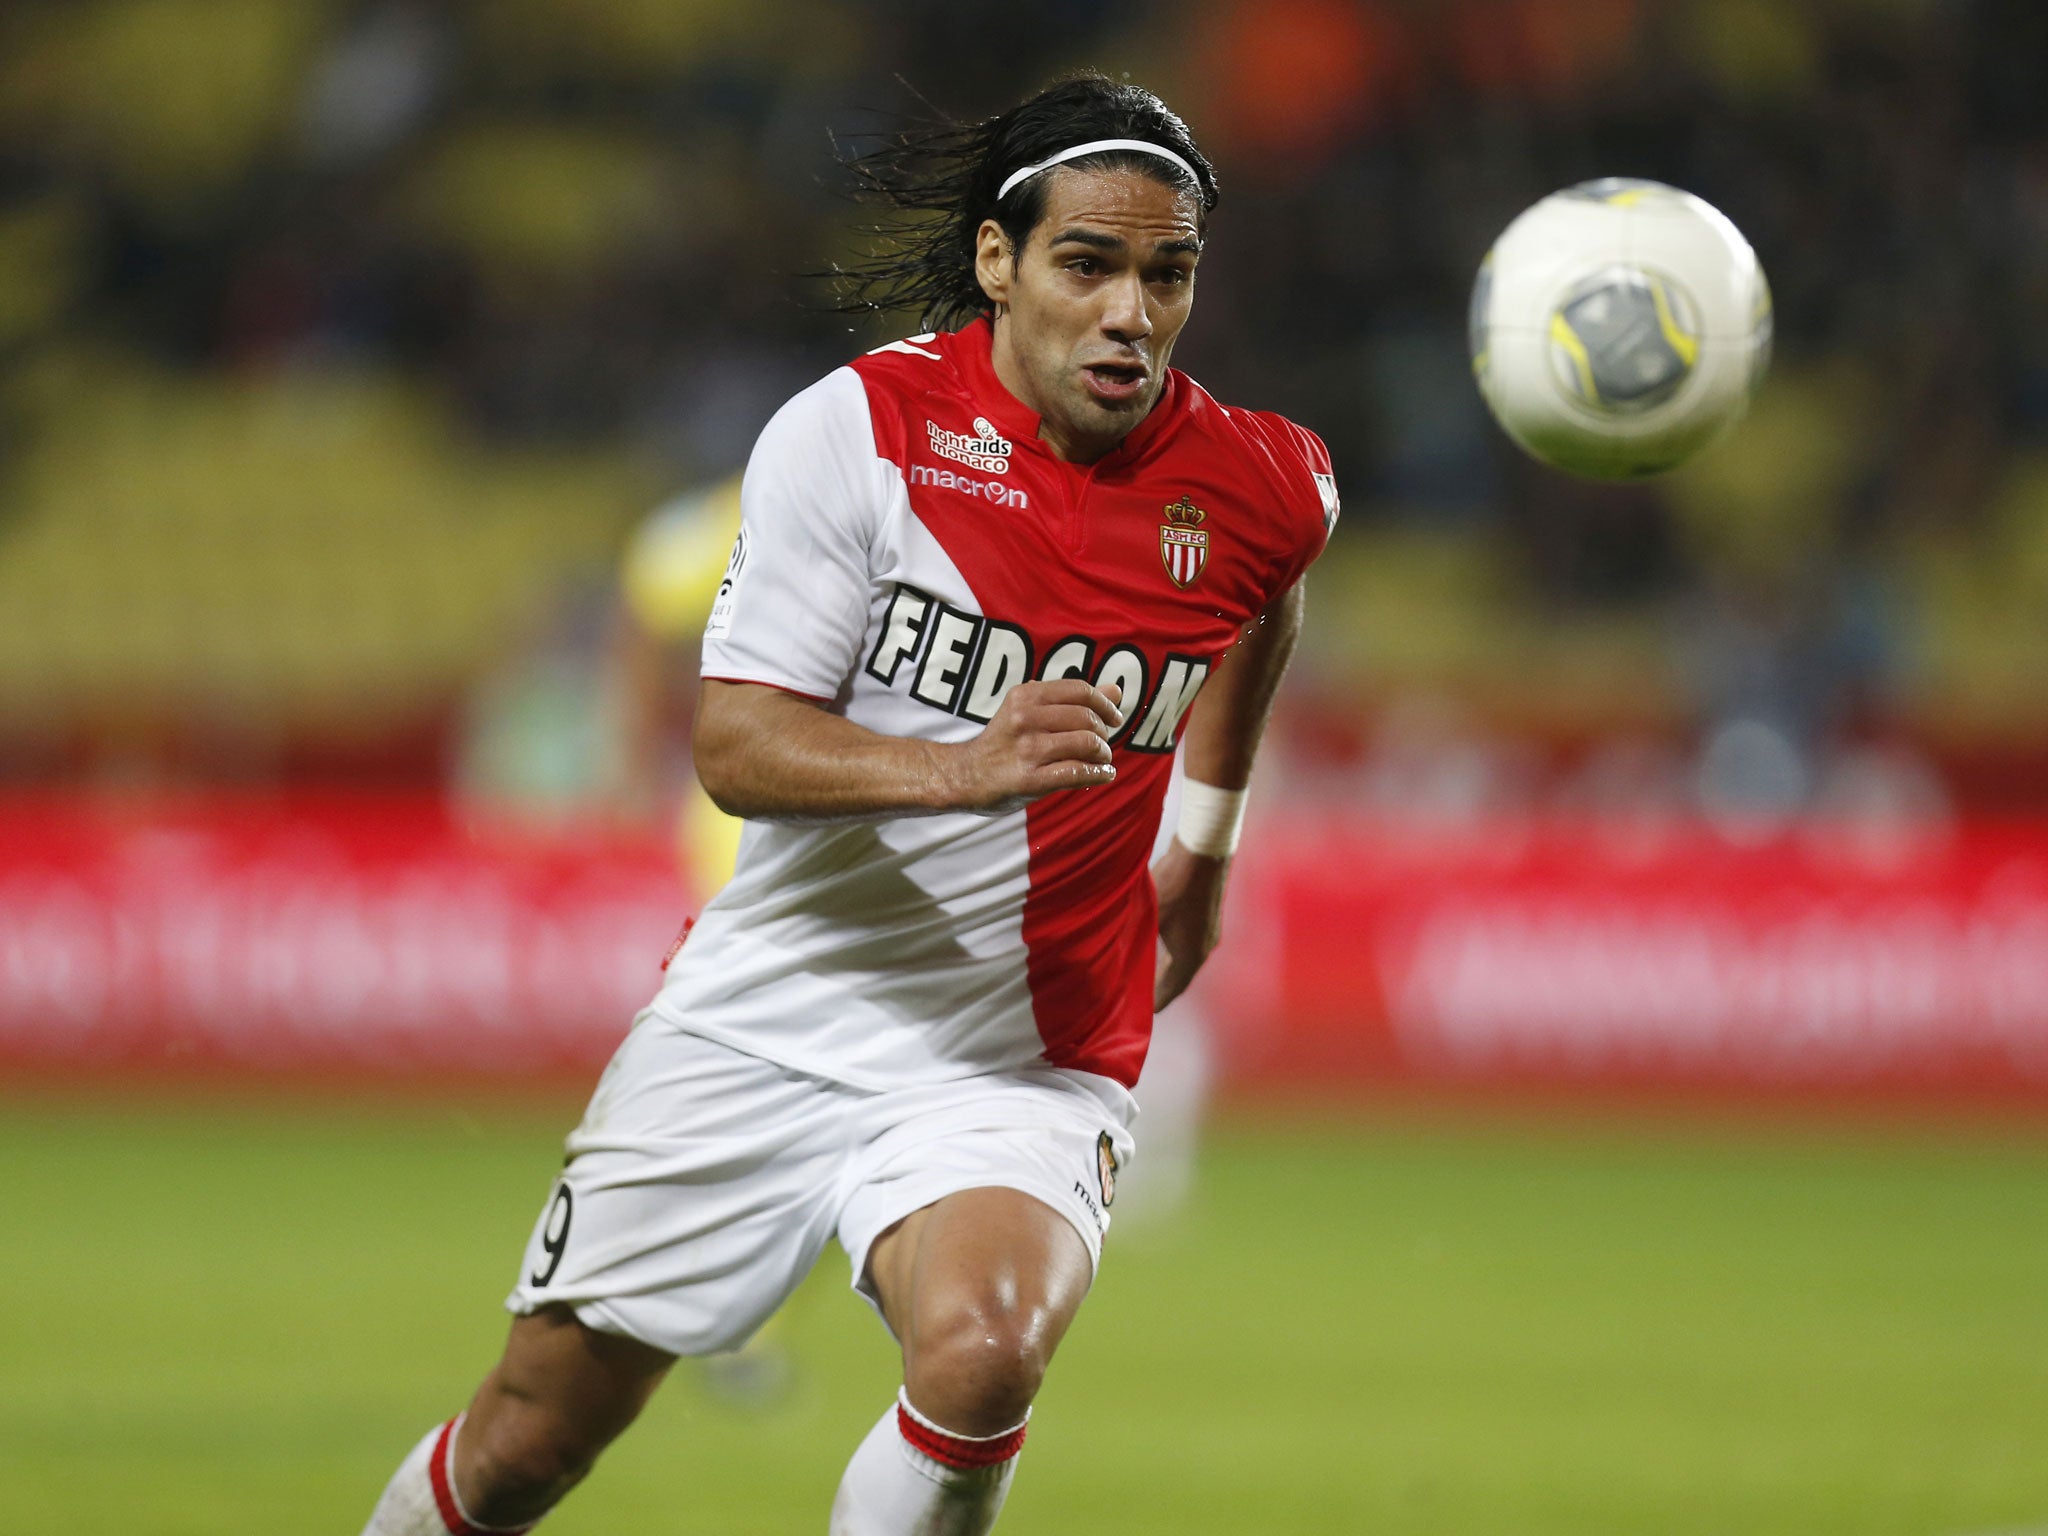 Radamel Falcao is reportedly the subject of interest from Manchester City